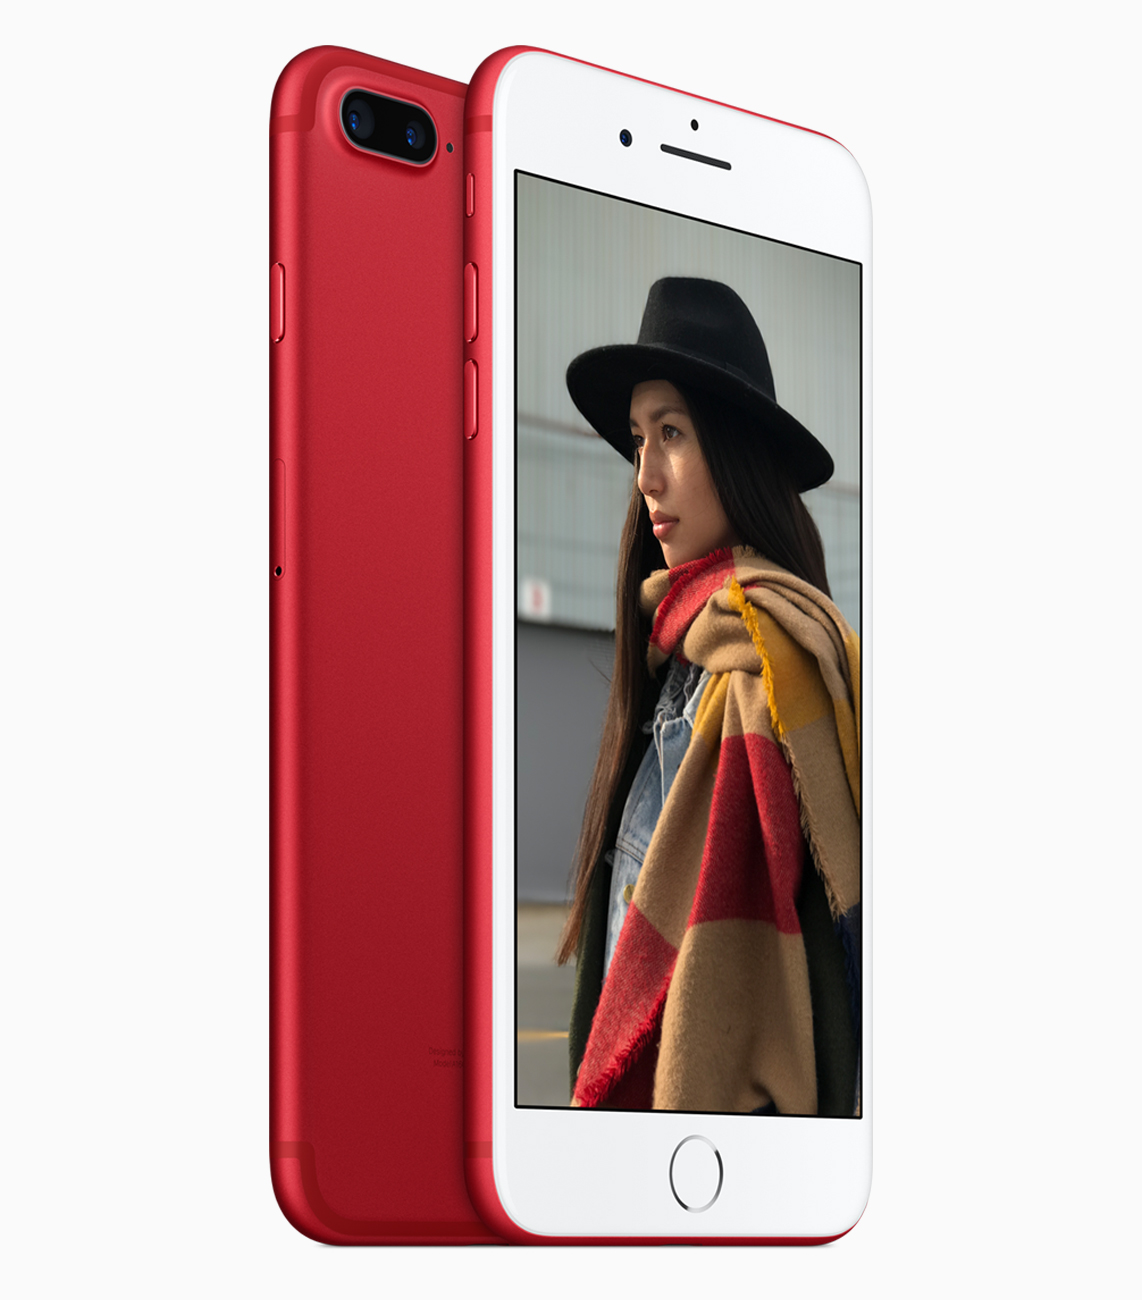 Apple Announces RED iPhone 7 and iPhone 7 Plus 